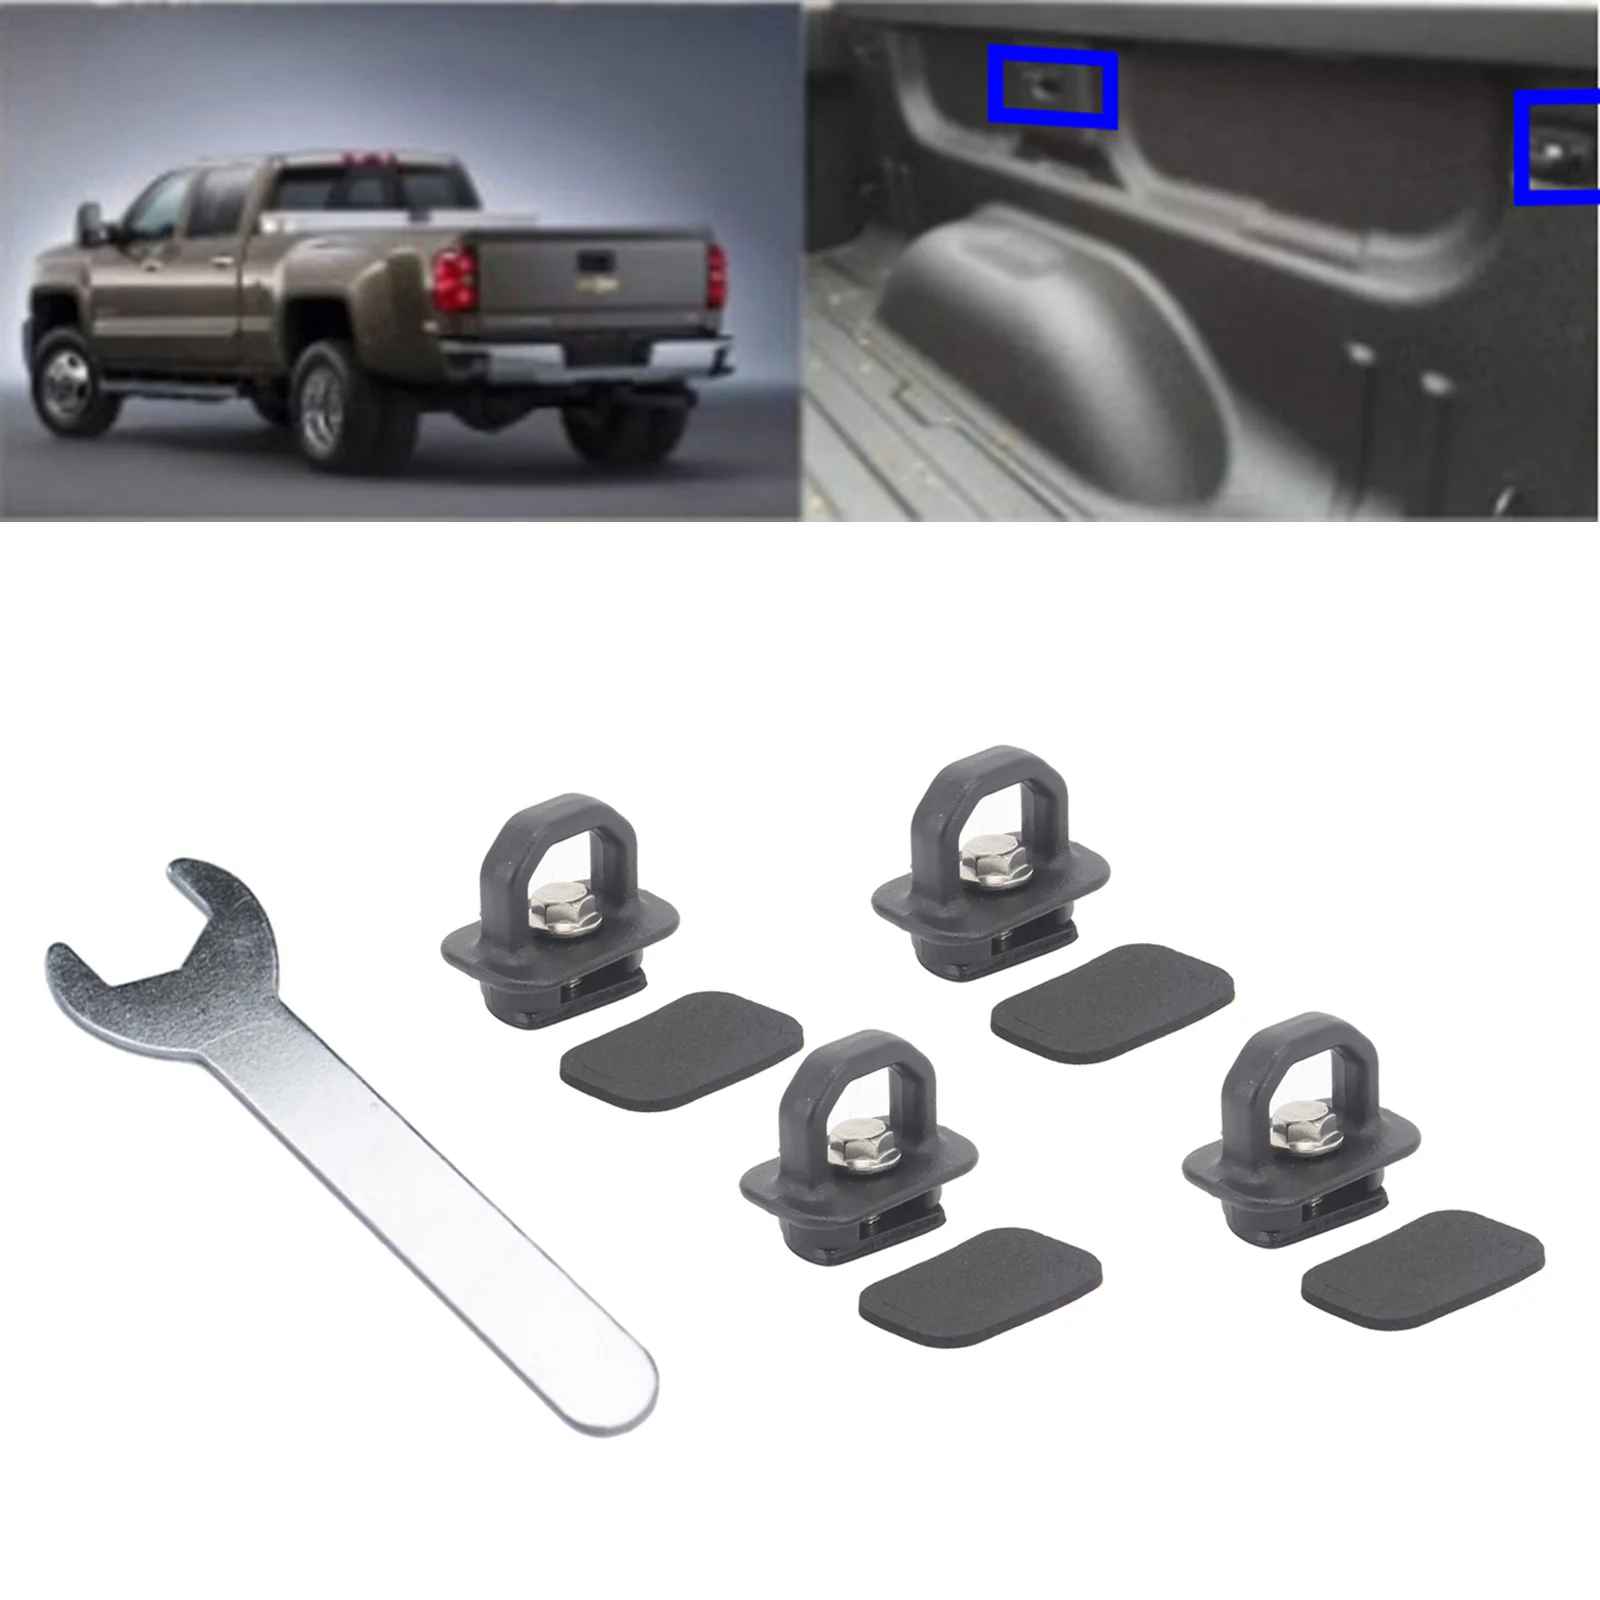 4Pcs Tie Down Anchors Hooks Tie Downs for   Pickup Trucks